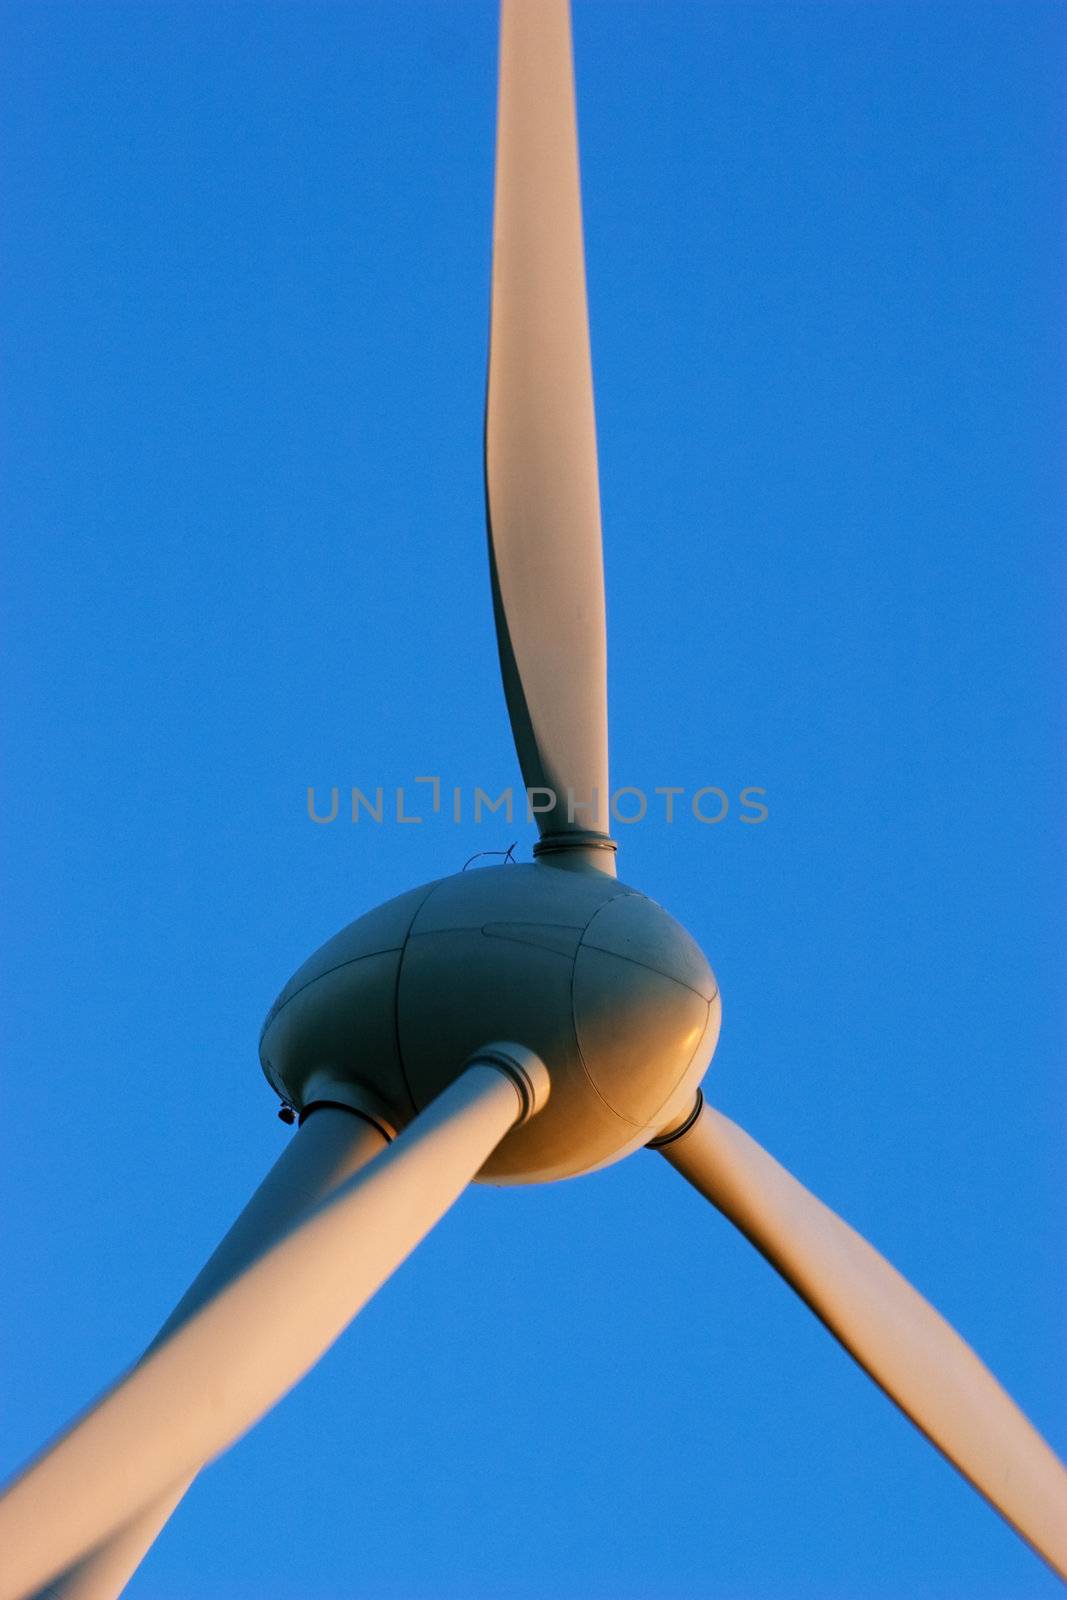 Windturbines close-up on blue sky. Producing environment friendly energy to prevent global warming.